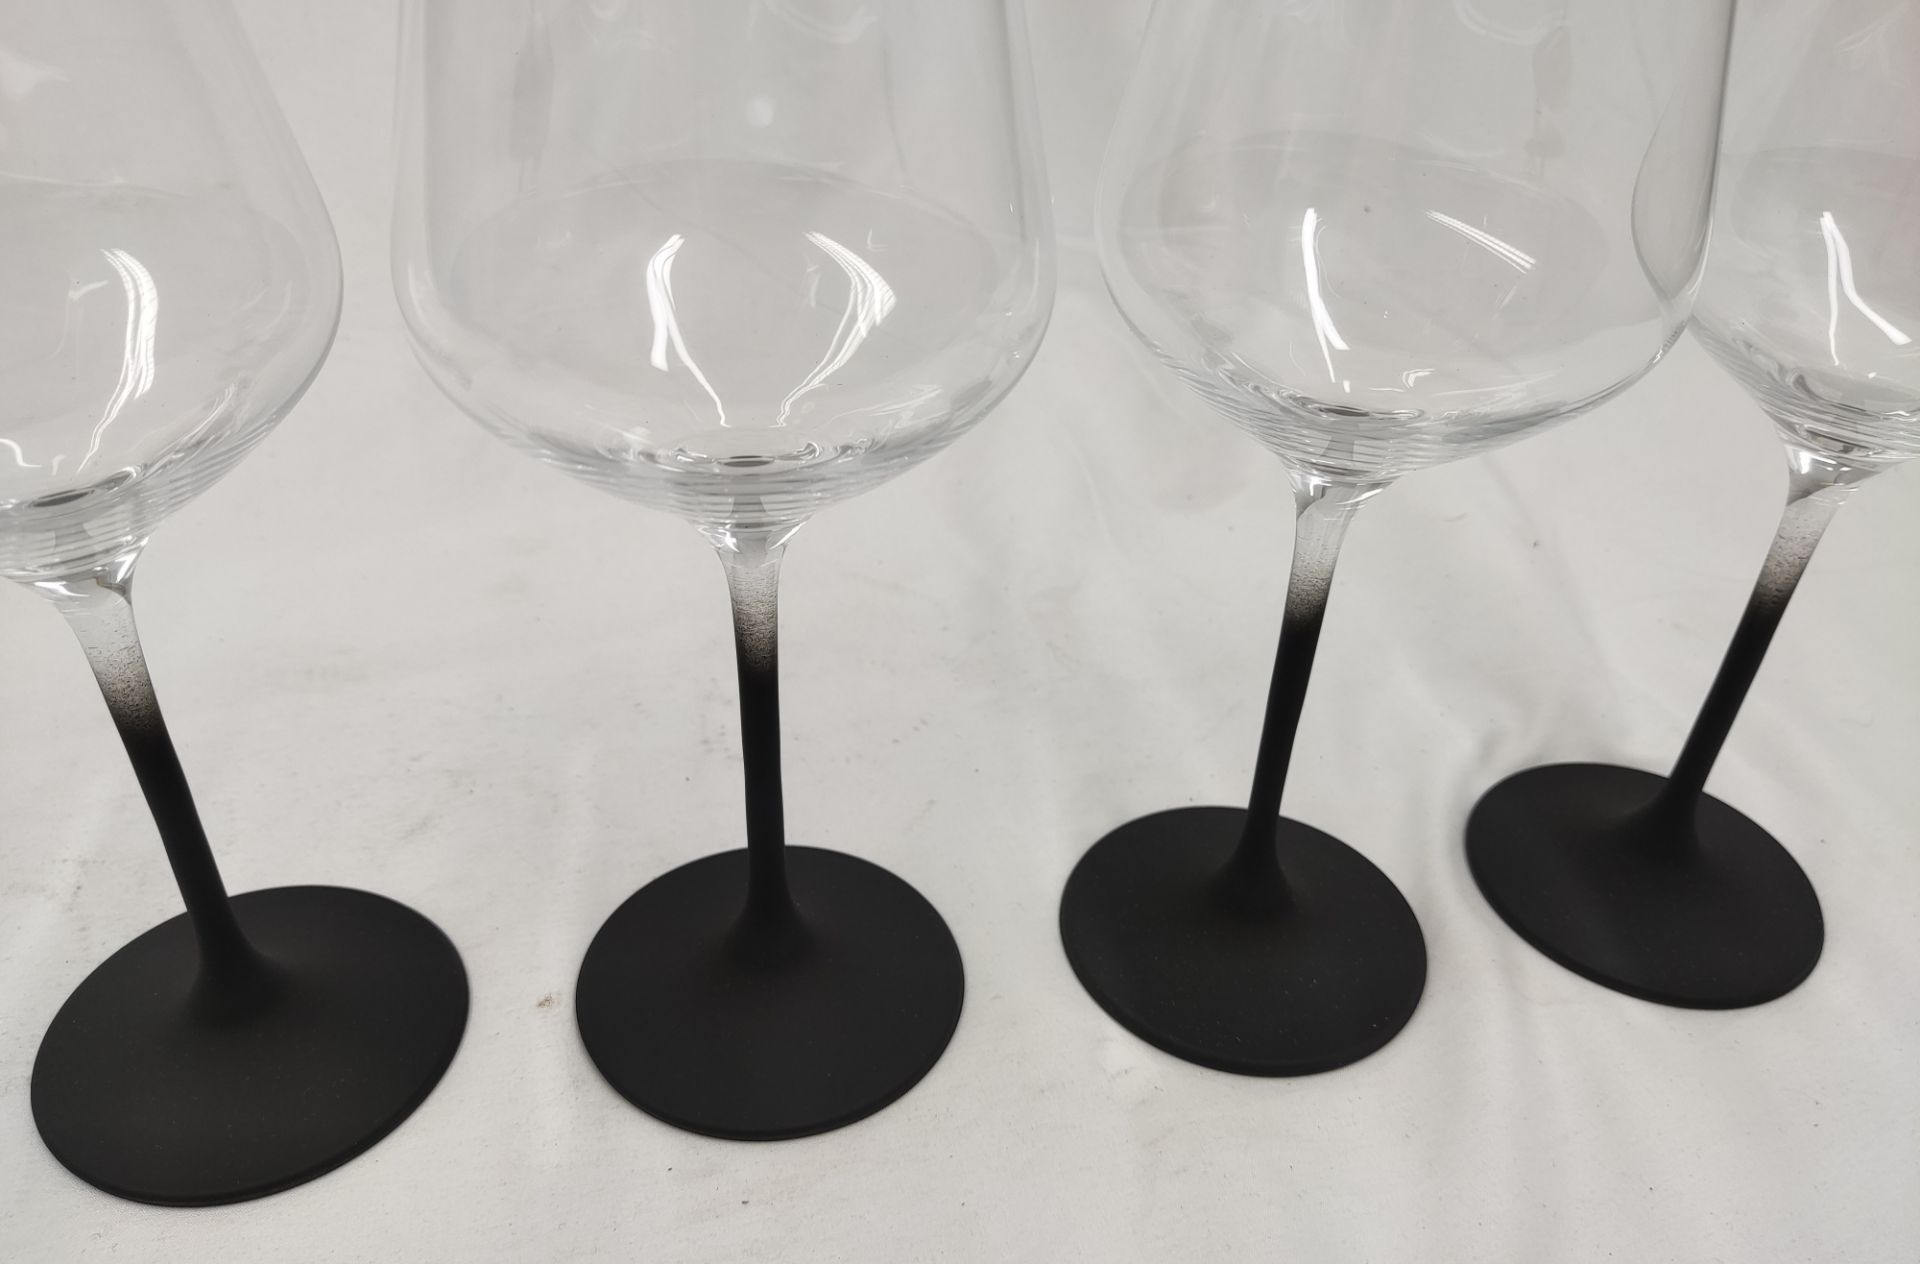 1 x VILLEROY & BOCH Manufacture Rock Red Wine Goblet Set, 4 Piece - New And Boxed - RRP £66 - Ref: - Image 11 of 12